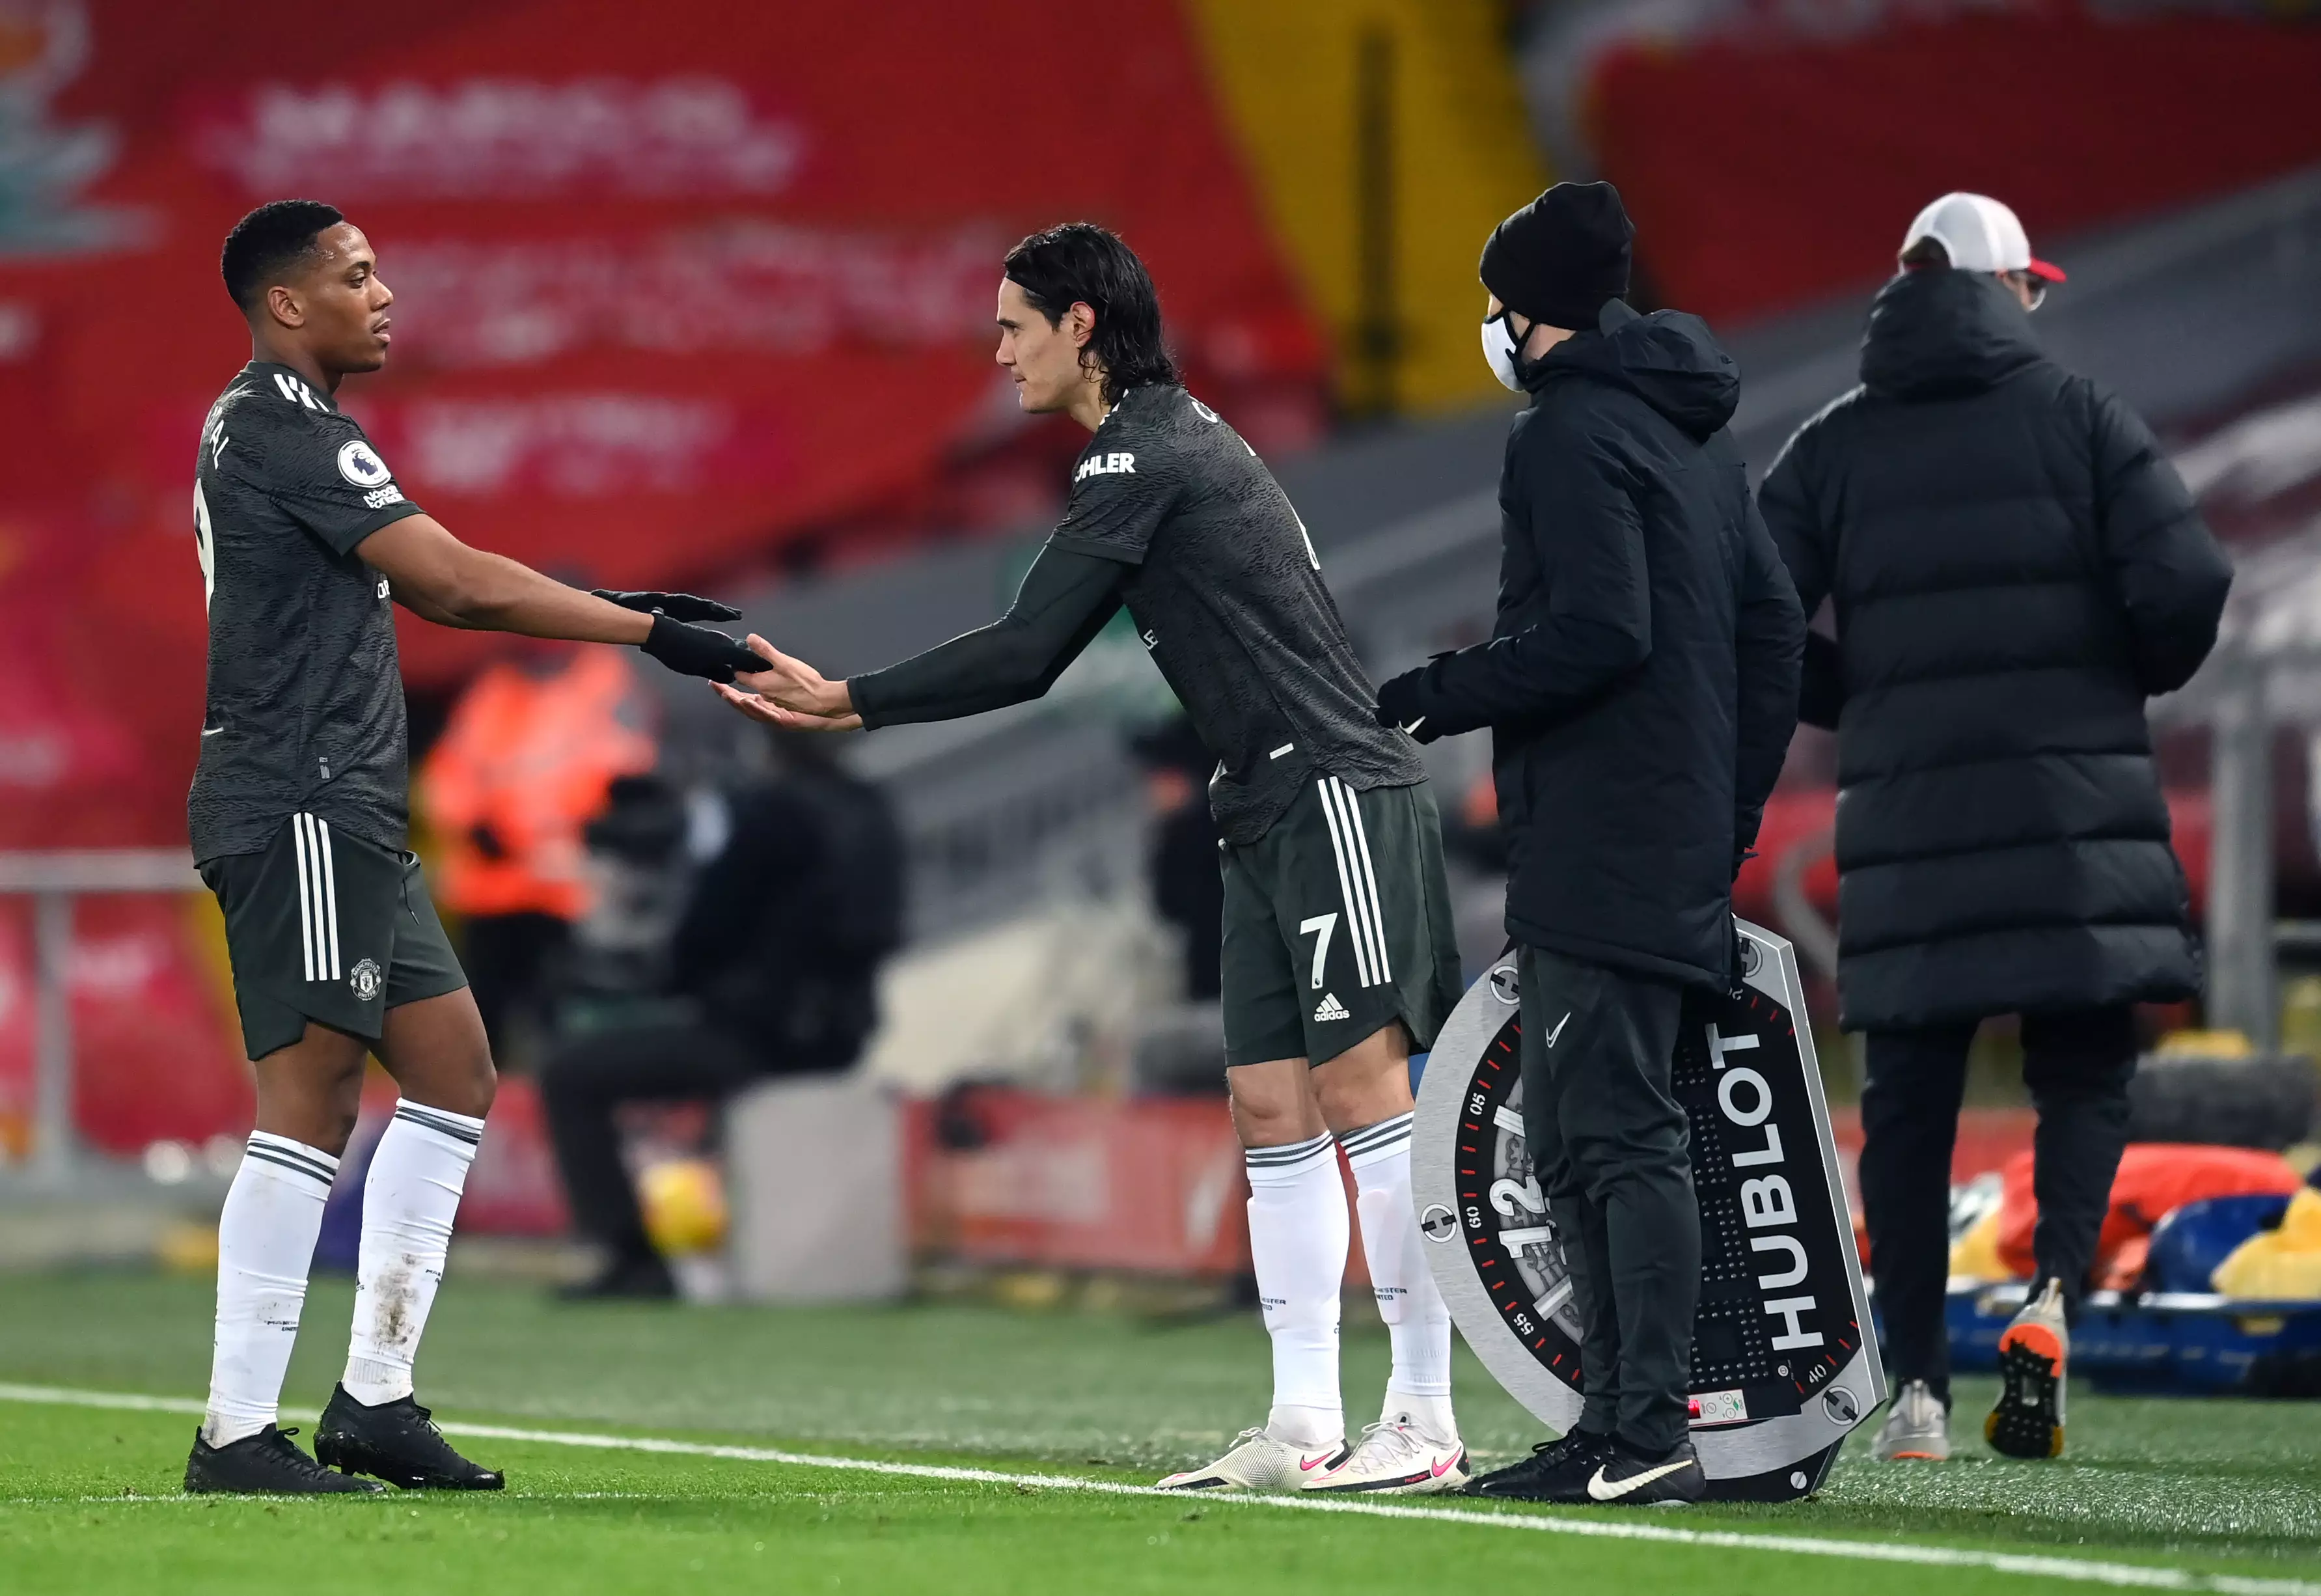 Martial found himself replaced by Cavani before his injury. Image: PA Images